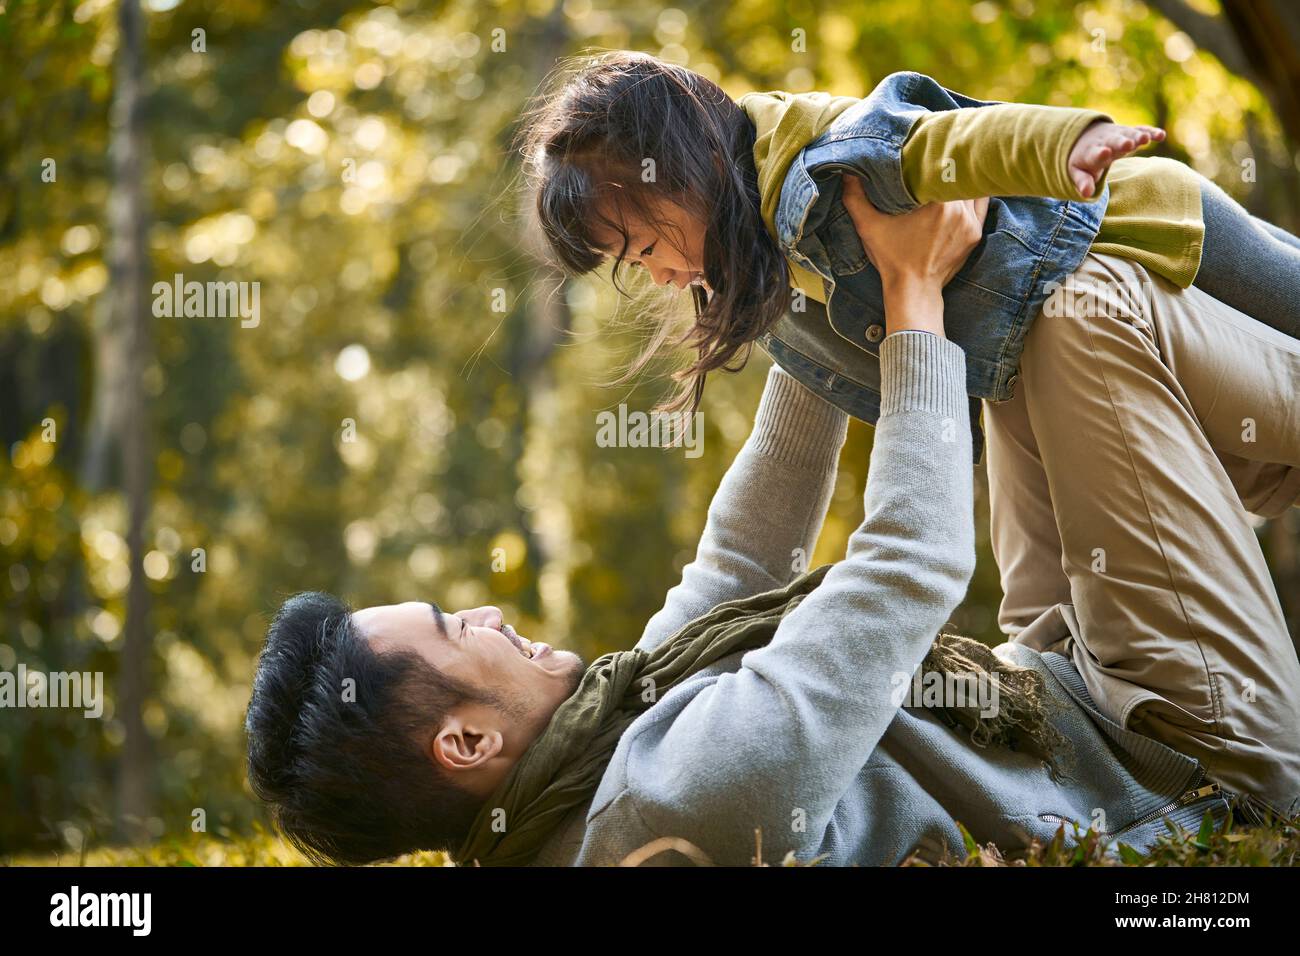 asian father and daughter having fun outdoors on the grass in city park Stock Photo